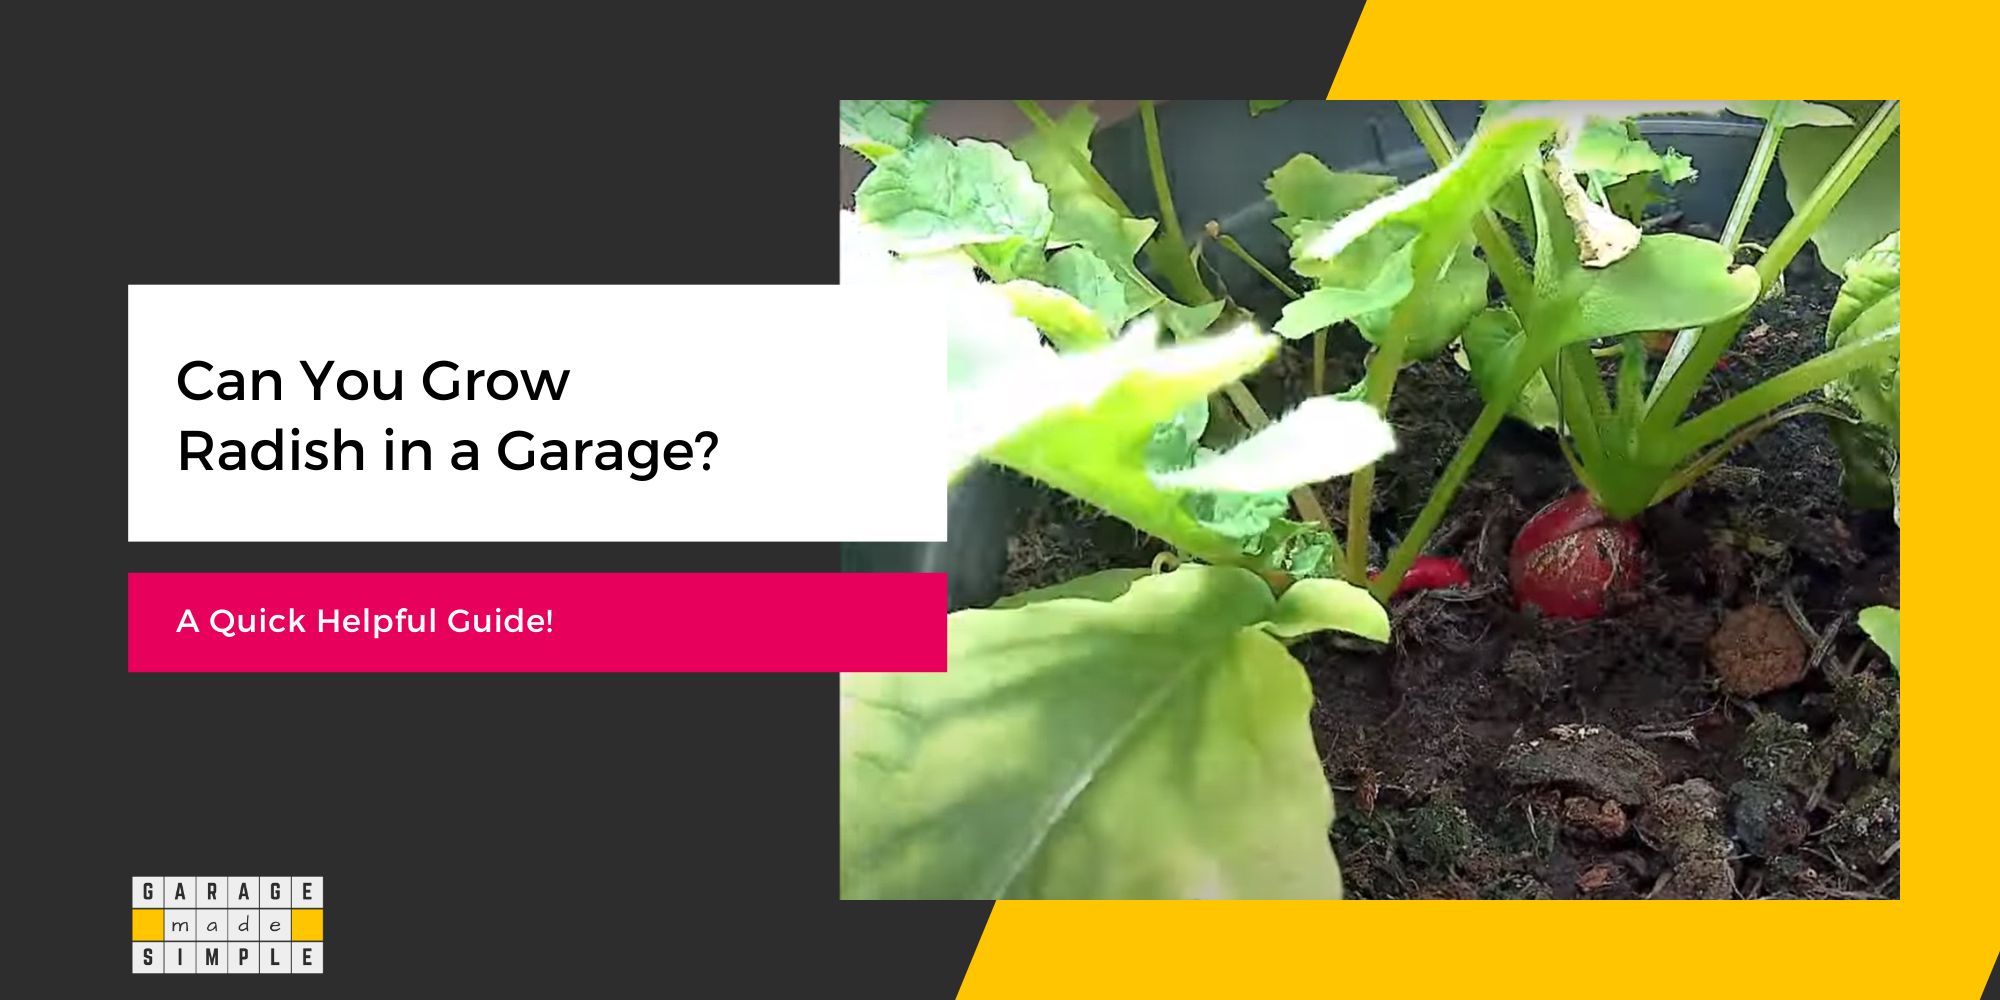 Can You Grow Radishes in a Garage? (A Quick Helpful Guide!)